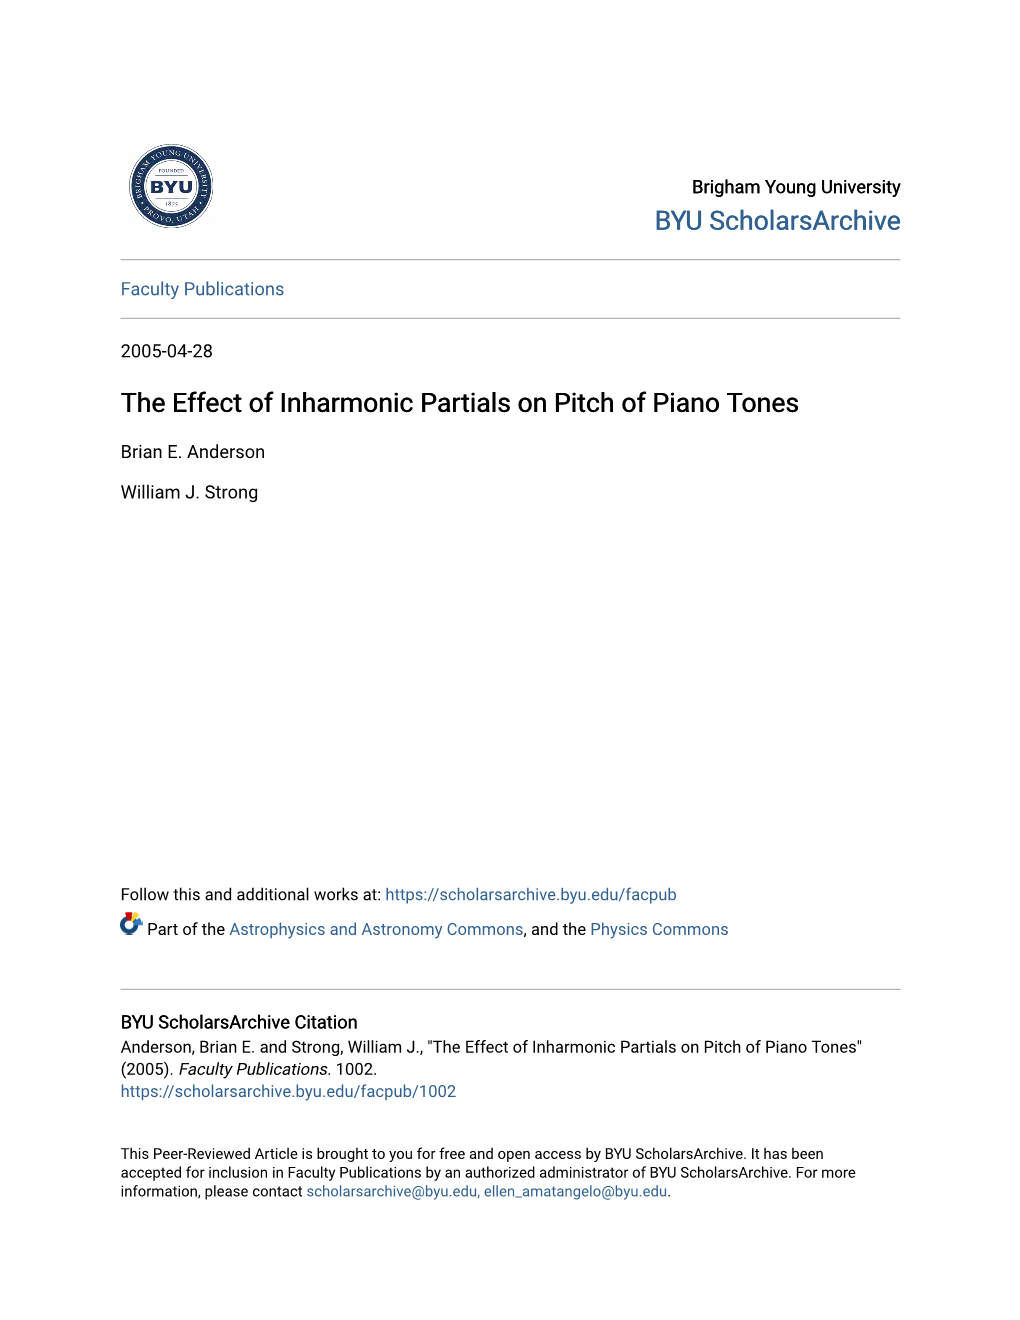 The Effect of Inharmonic Partials on Pitch of Piano Tones